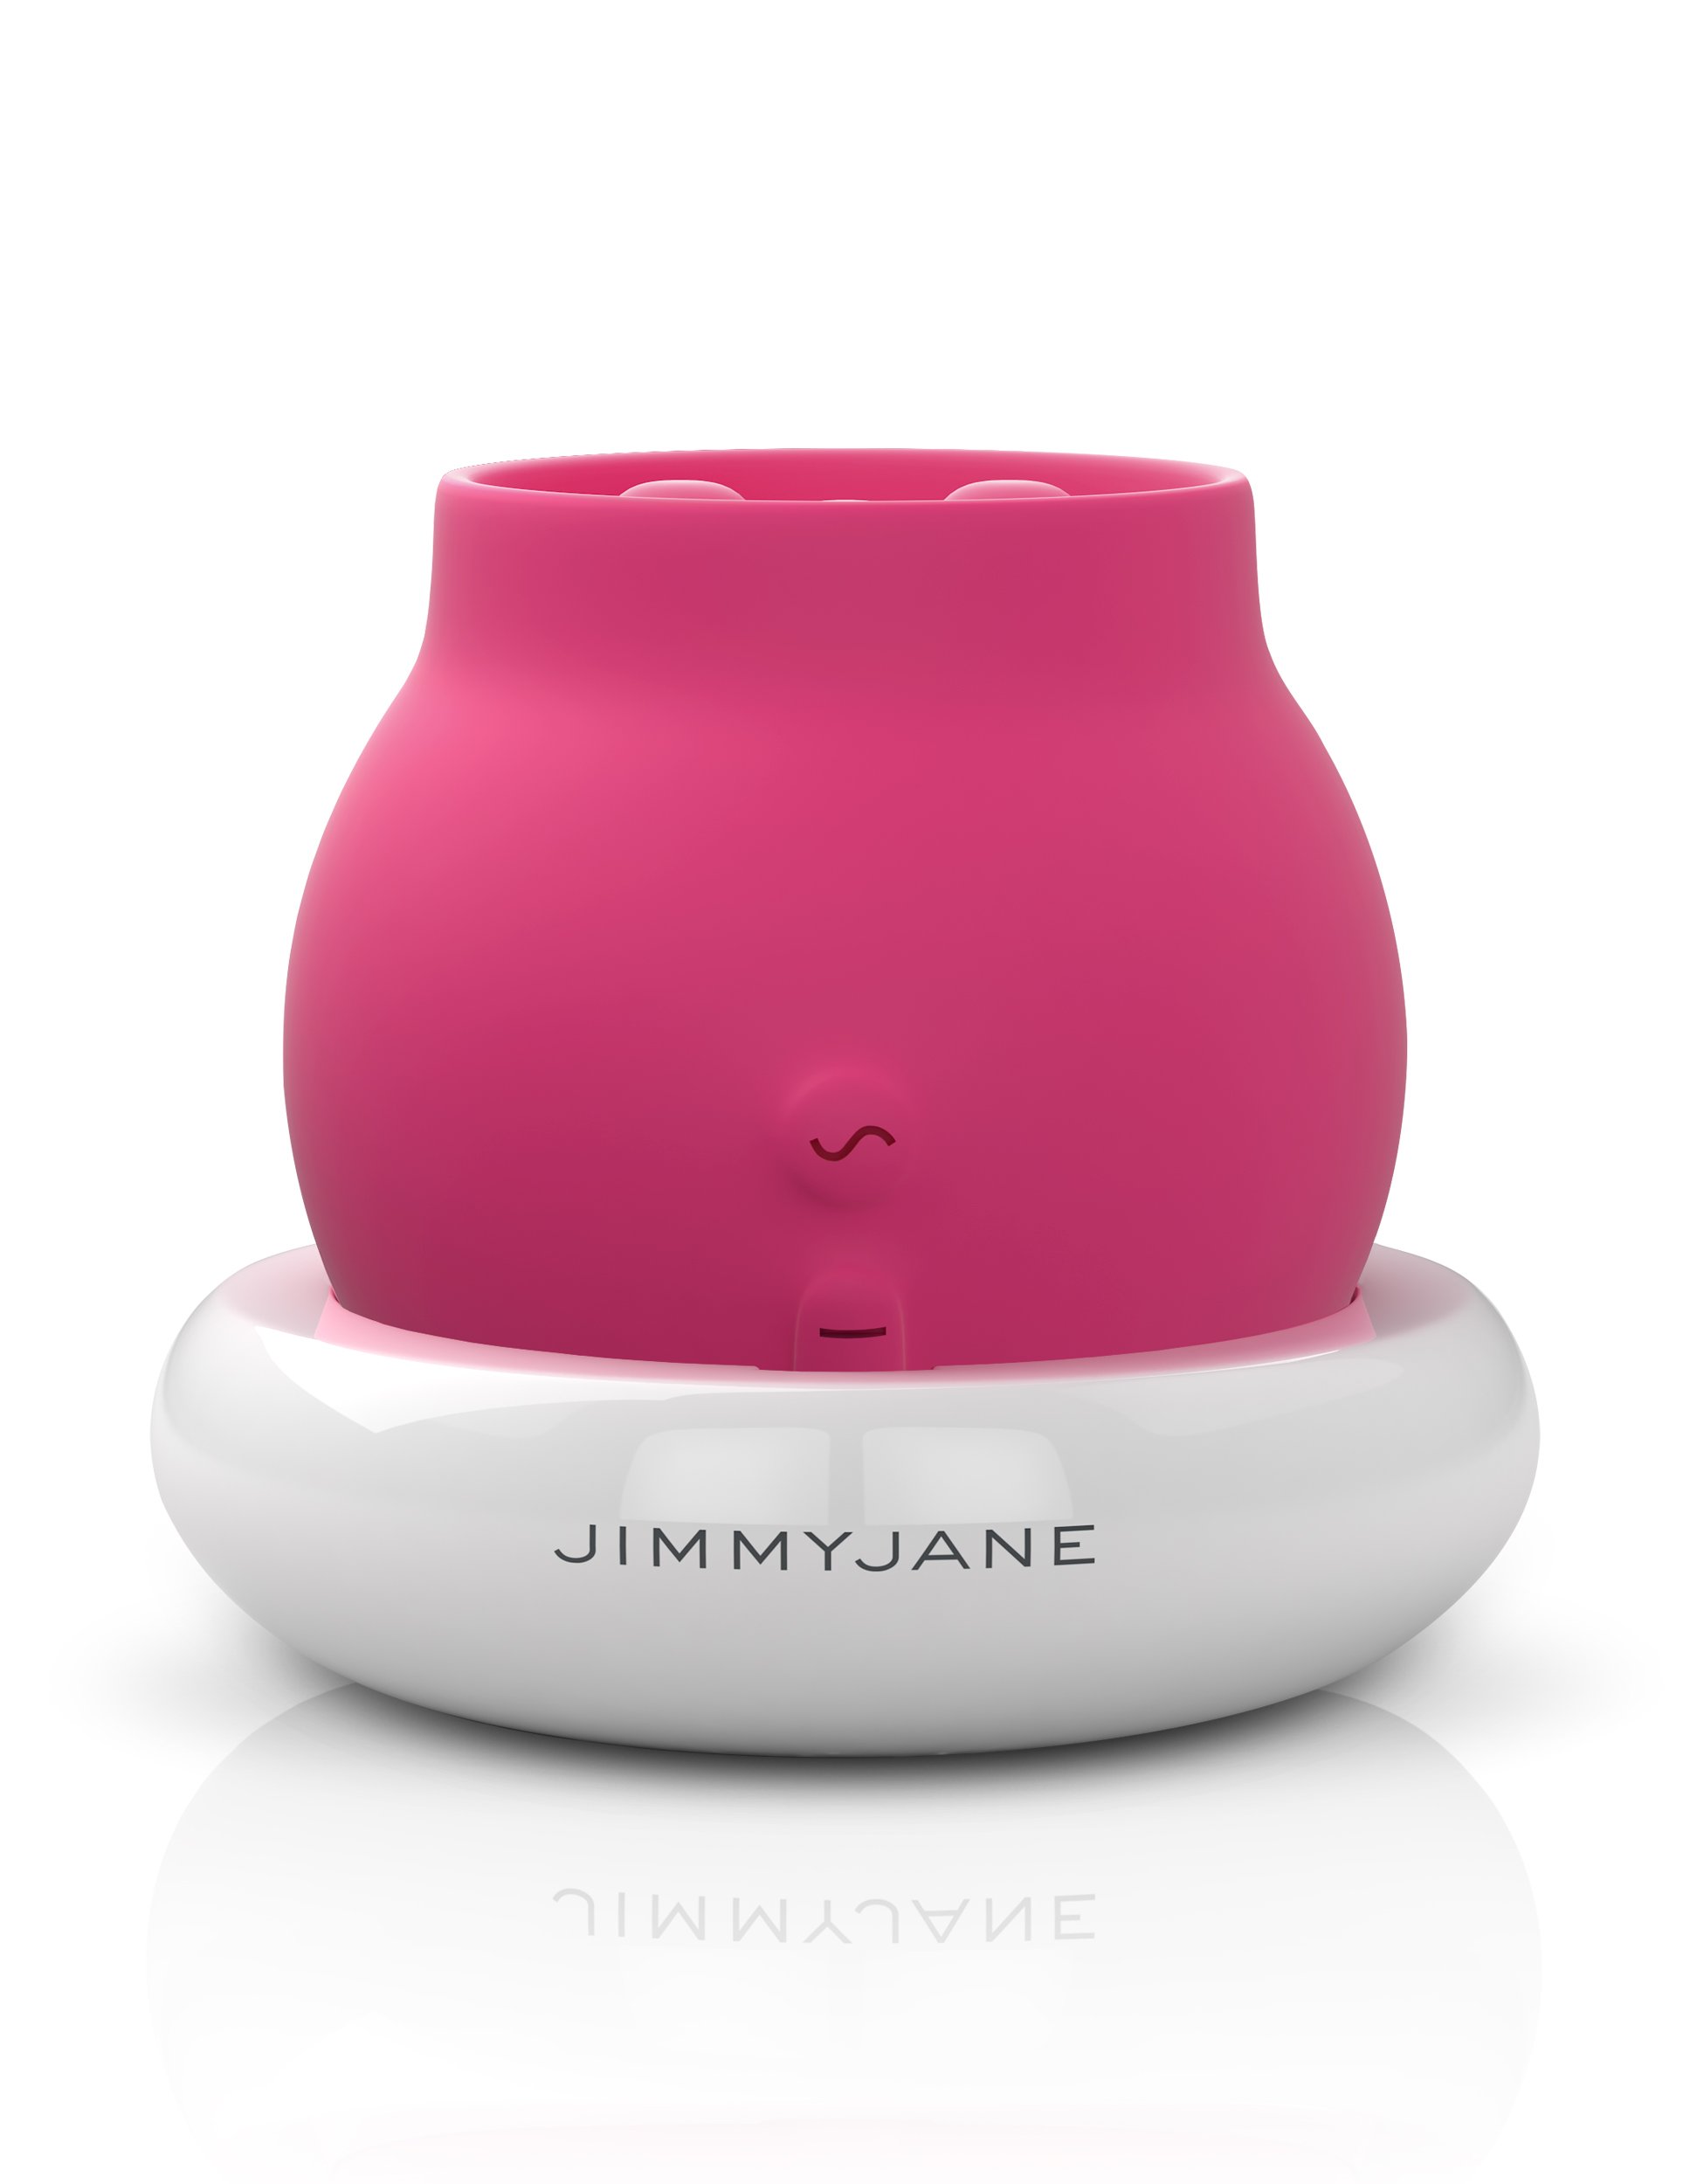  Halo Love Pod by Jimmy Jane - Product Review  